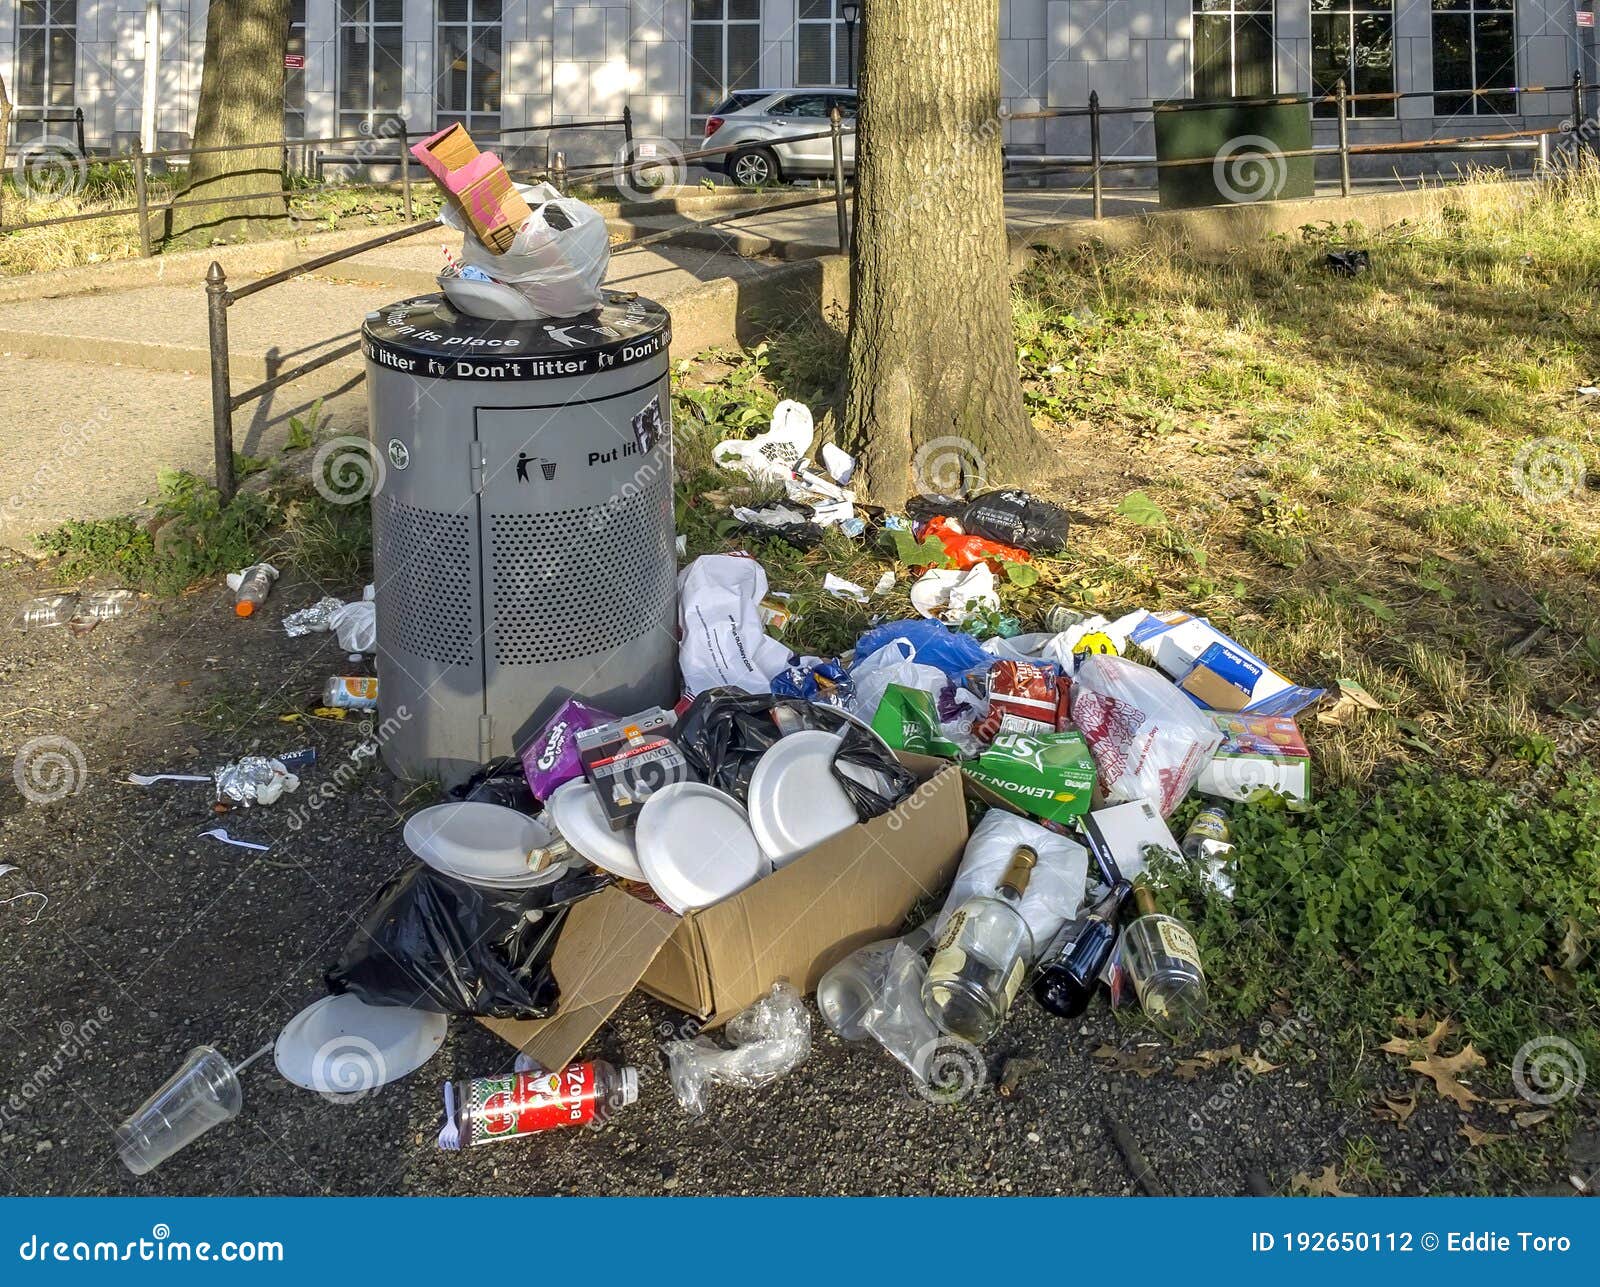 Trash Builds Up Outdoors In Bronx Public Park Due To Sanitation Budget Cuts NY Editorial ...